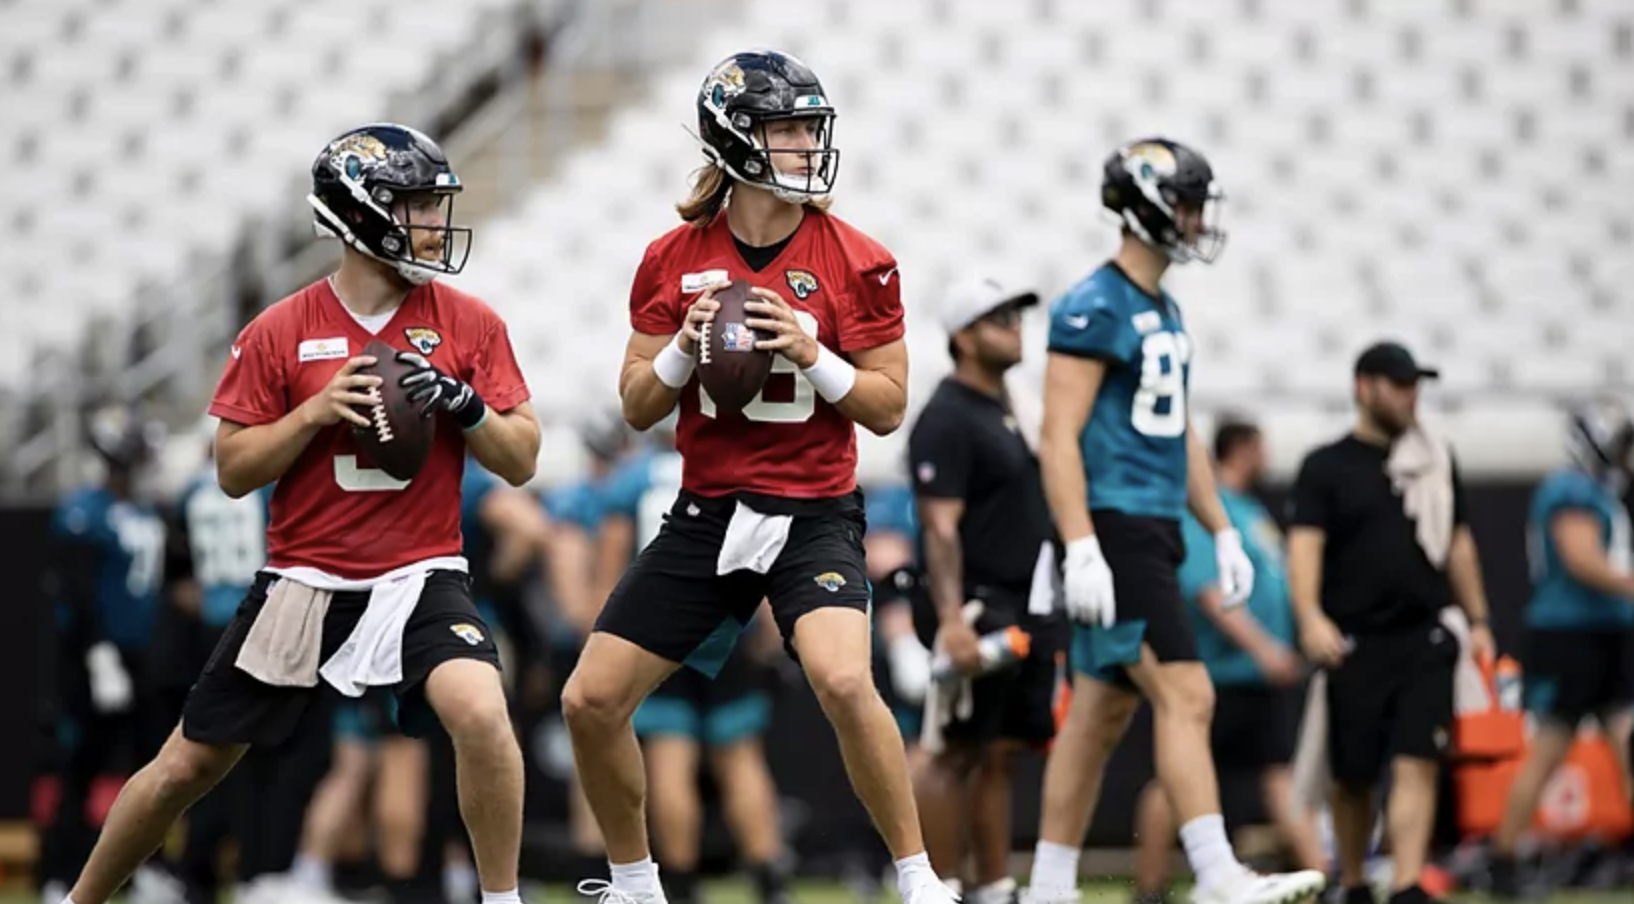 The duo looking to end the Jacksonville Jaguars' losing ways